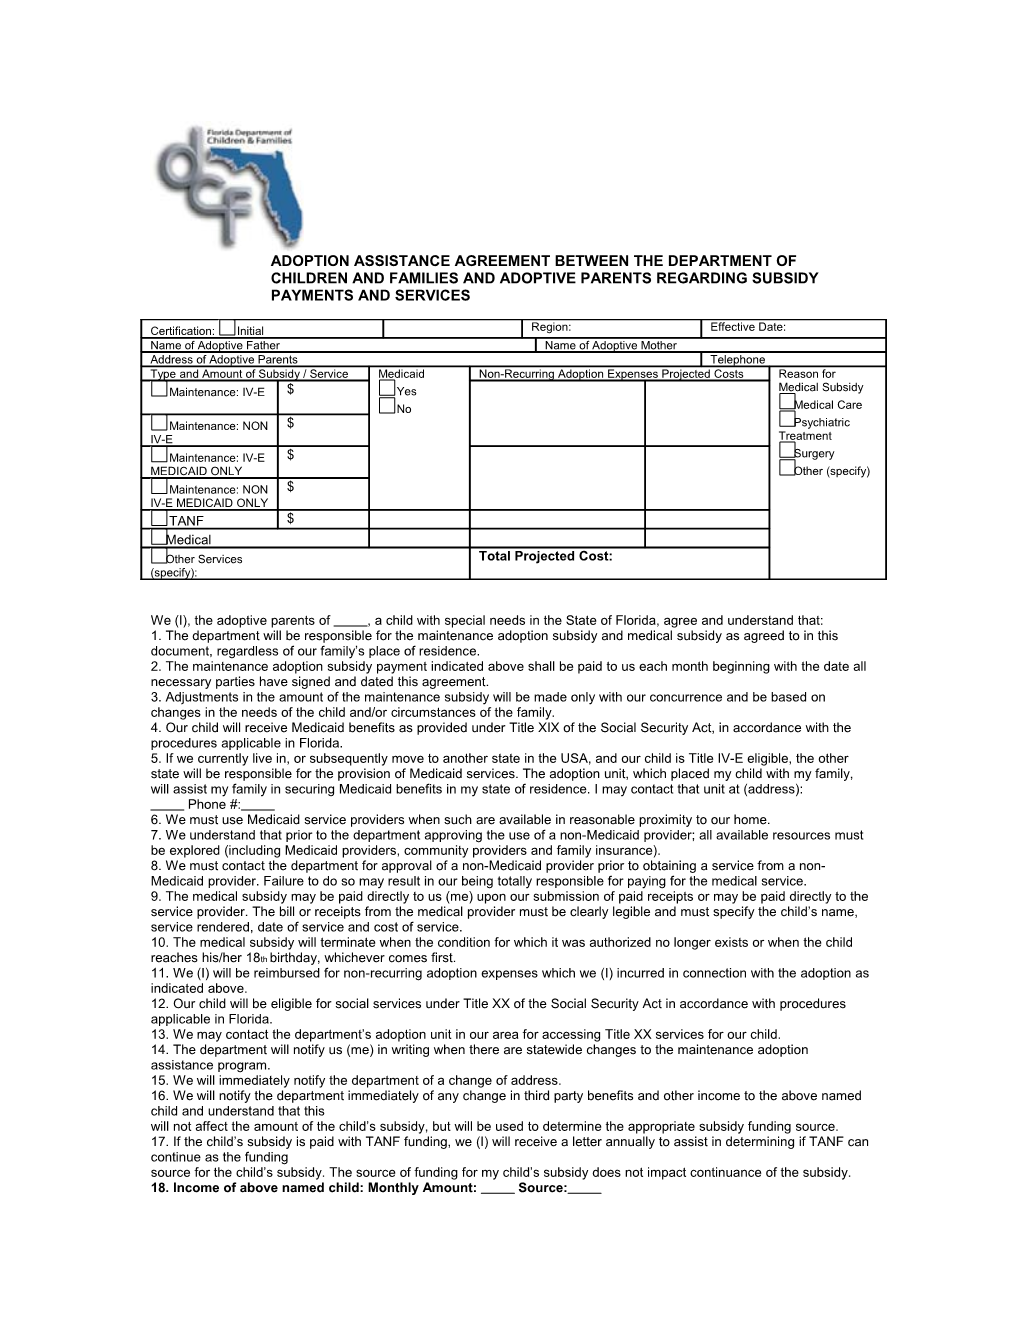 Adoption Assistance Agreement Between the Department Ofchildren and Families and Adoptive